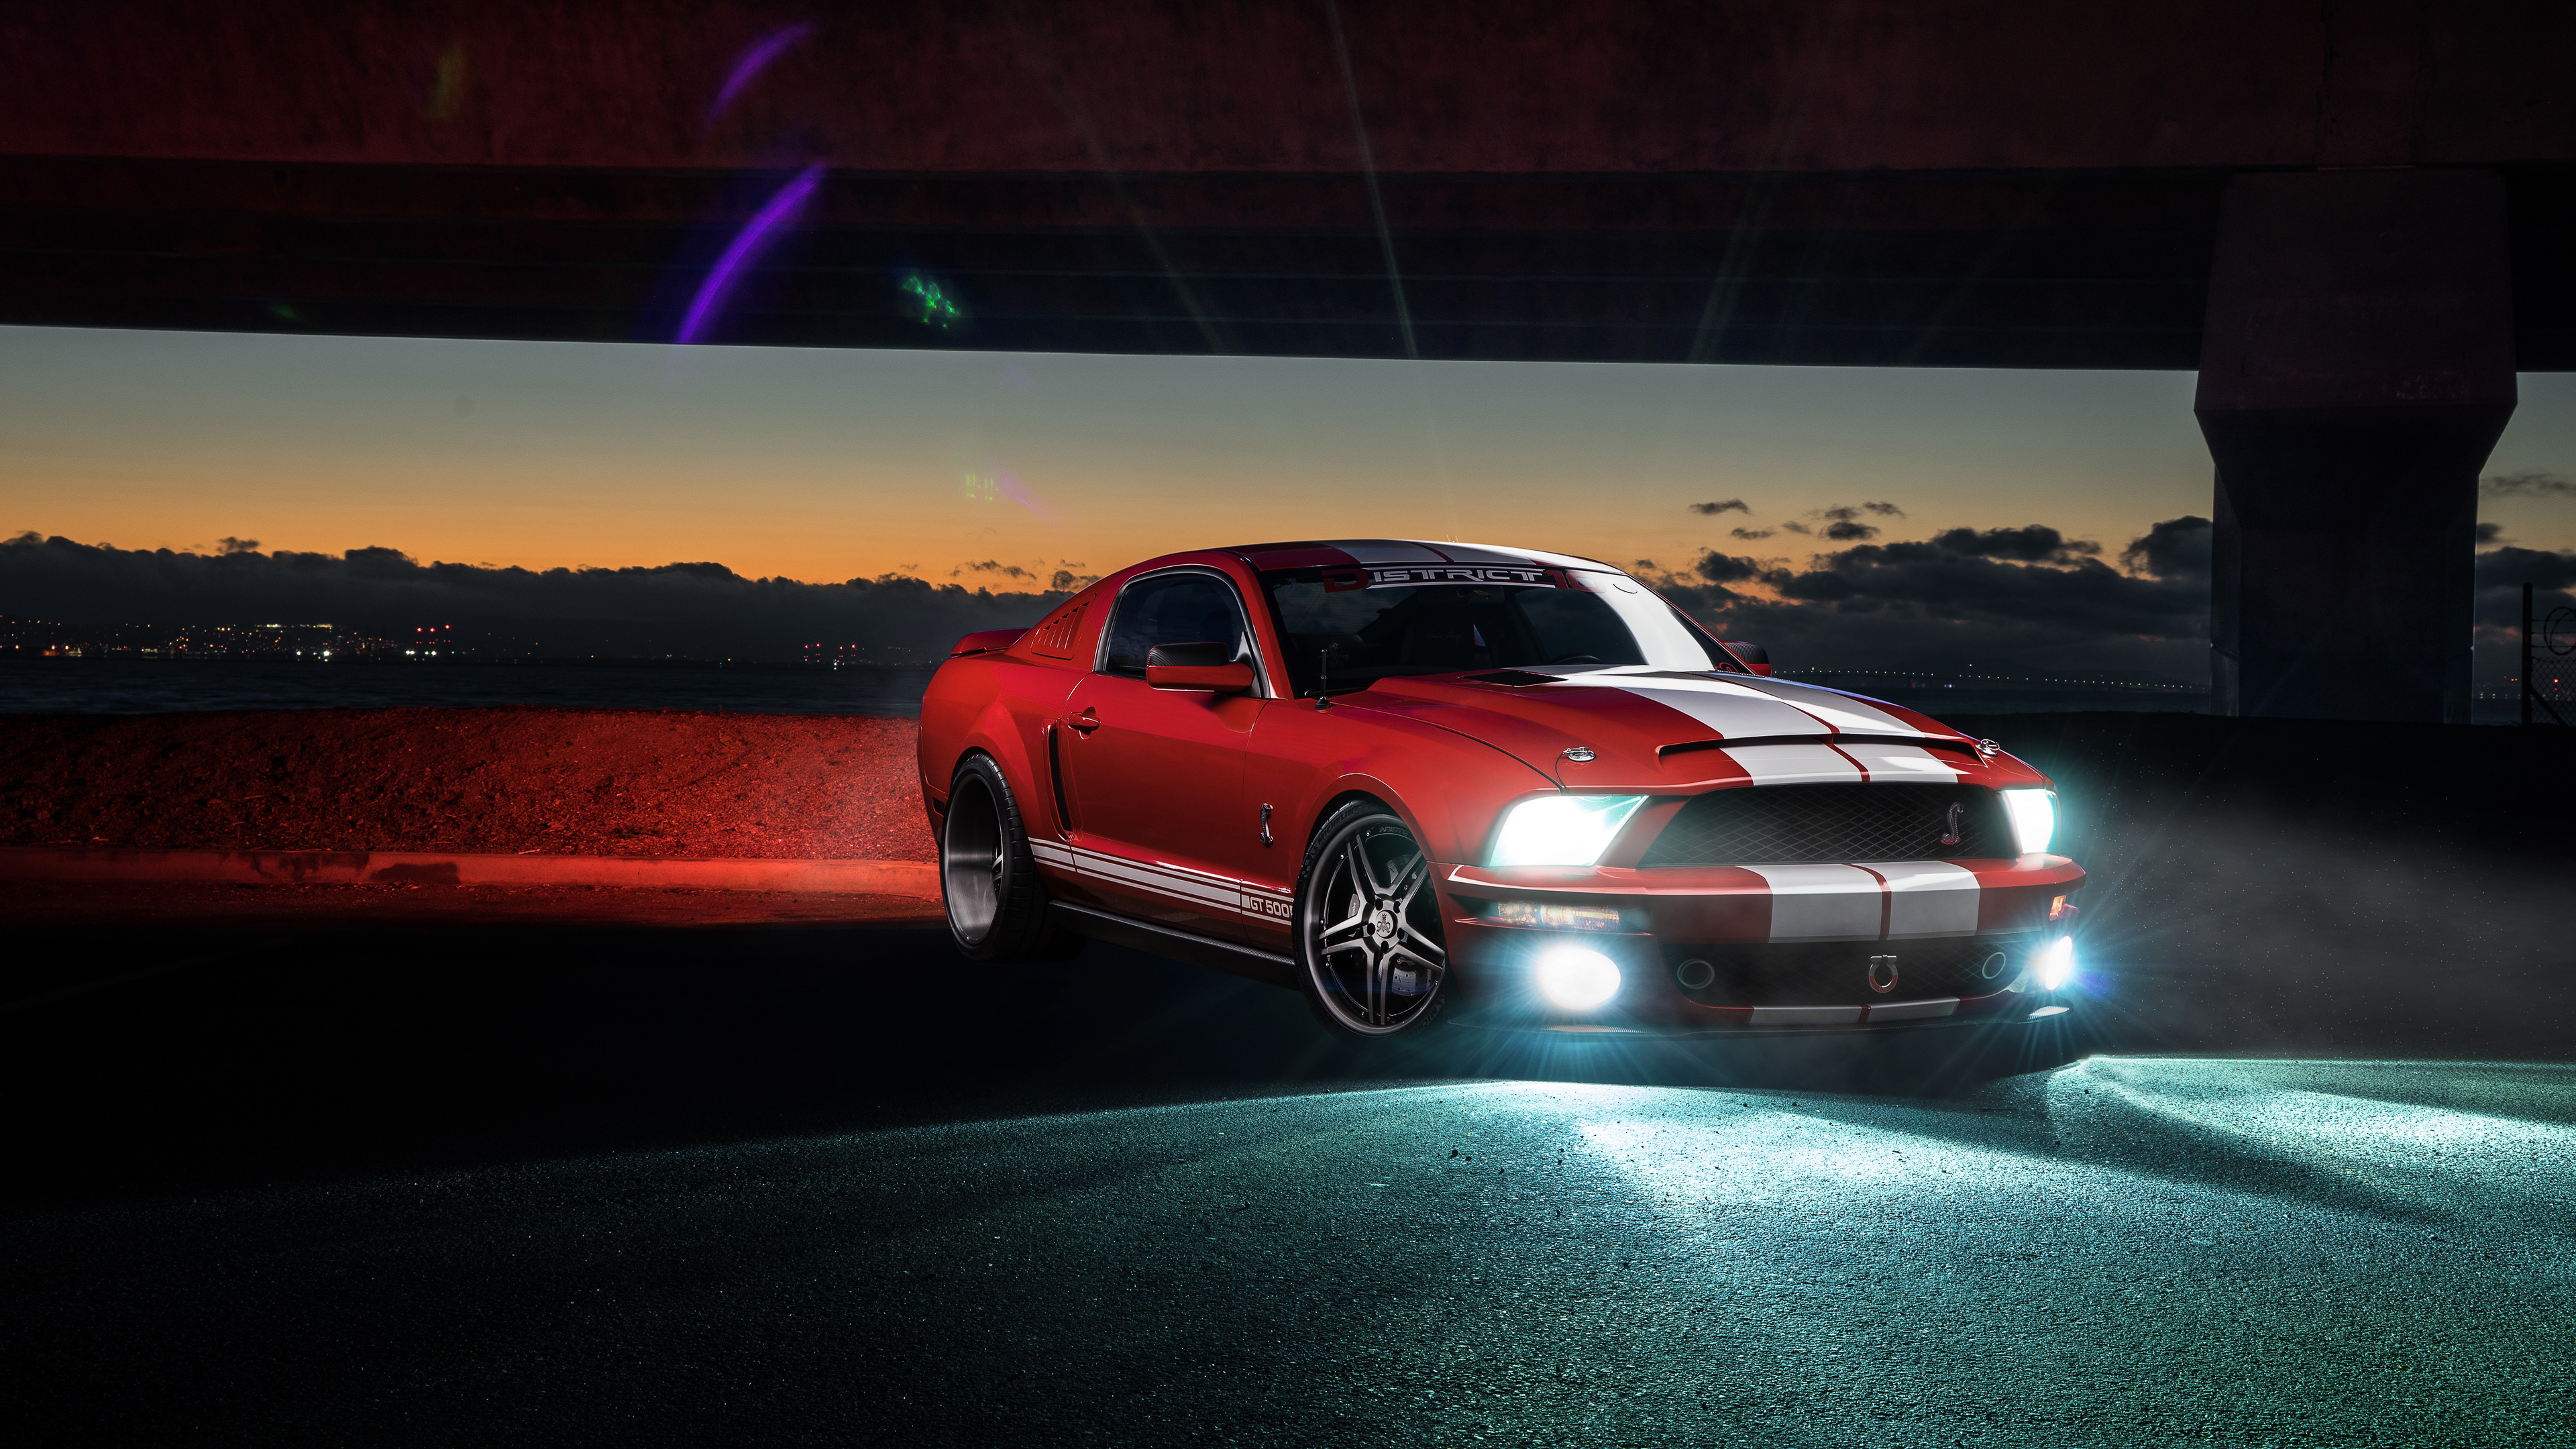 Ford Mustang Shelby Gt500 Wallpaper Hd Car Wallpapers Id 6526